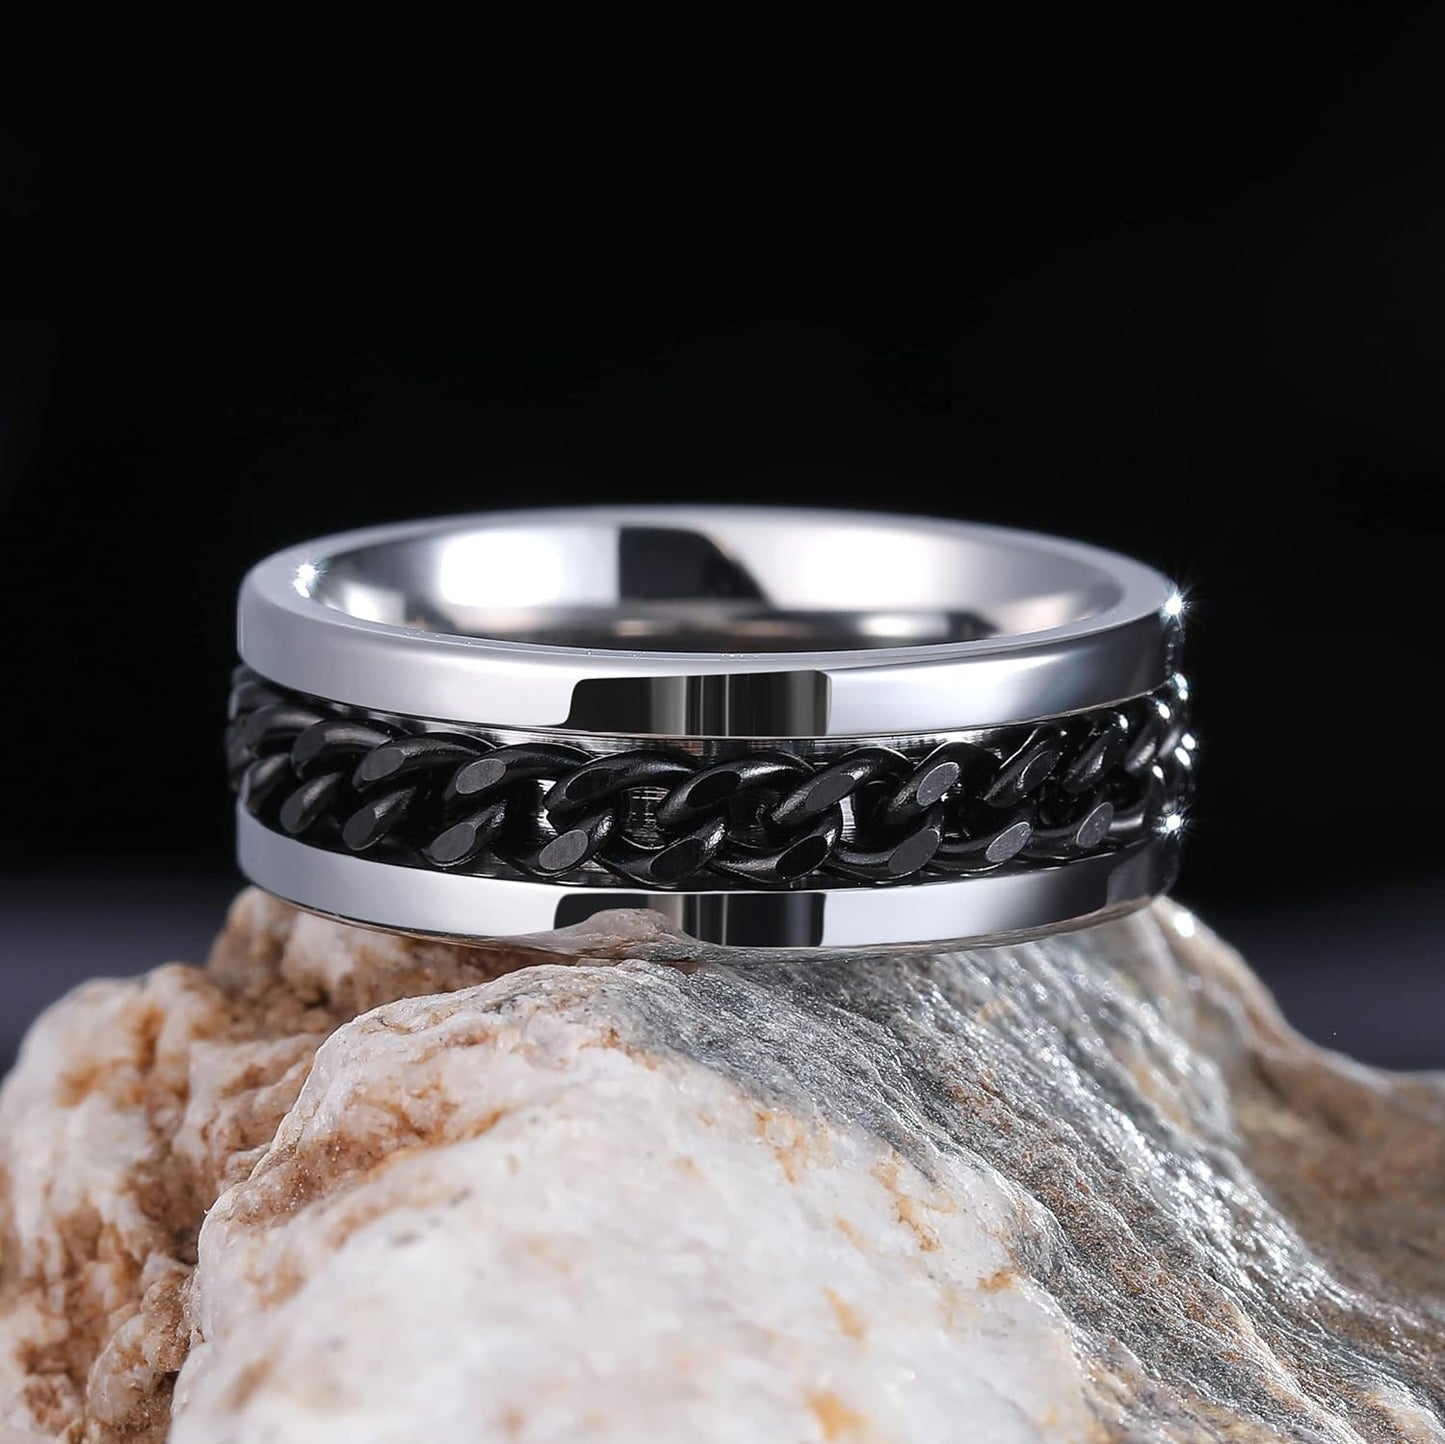 King Will Intertwine 8mm Spinner Ring Stainless Steel Fidget Ring Anxiety Ring for Men Black/Blue/Silver/Gold Fidget Anxiety Ring